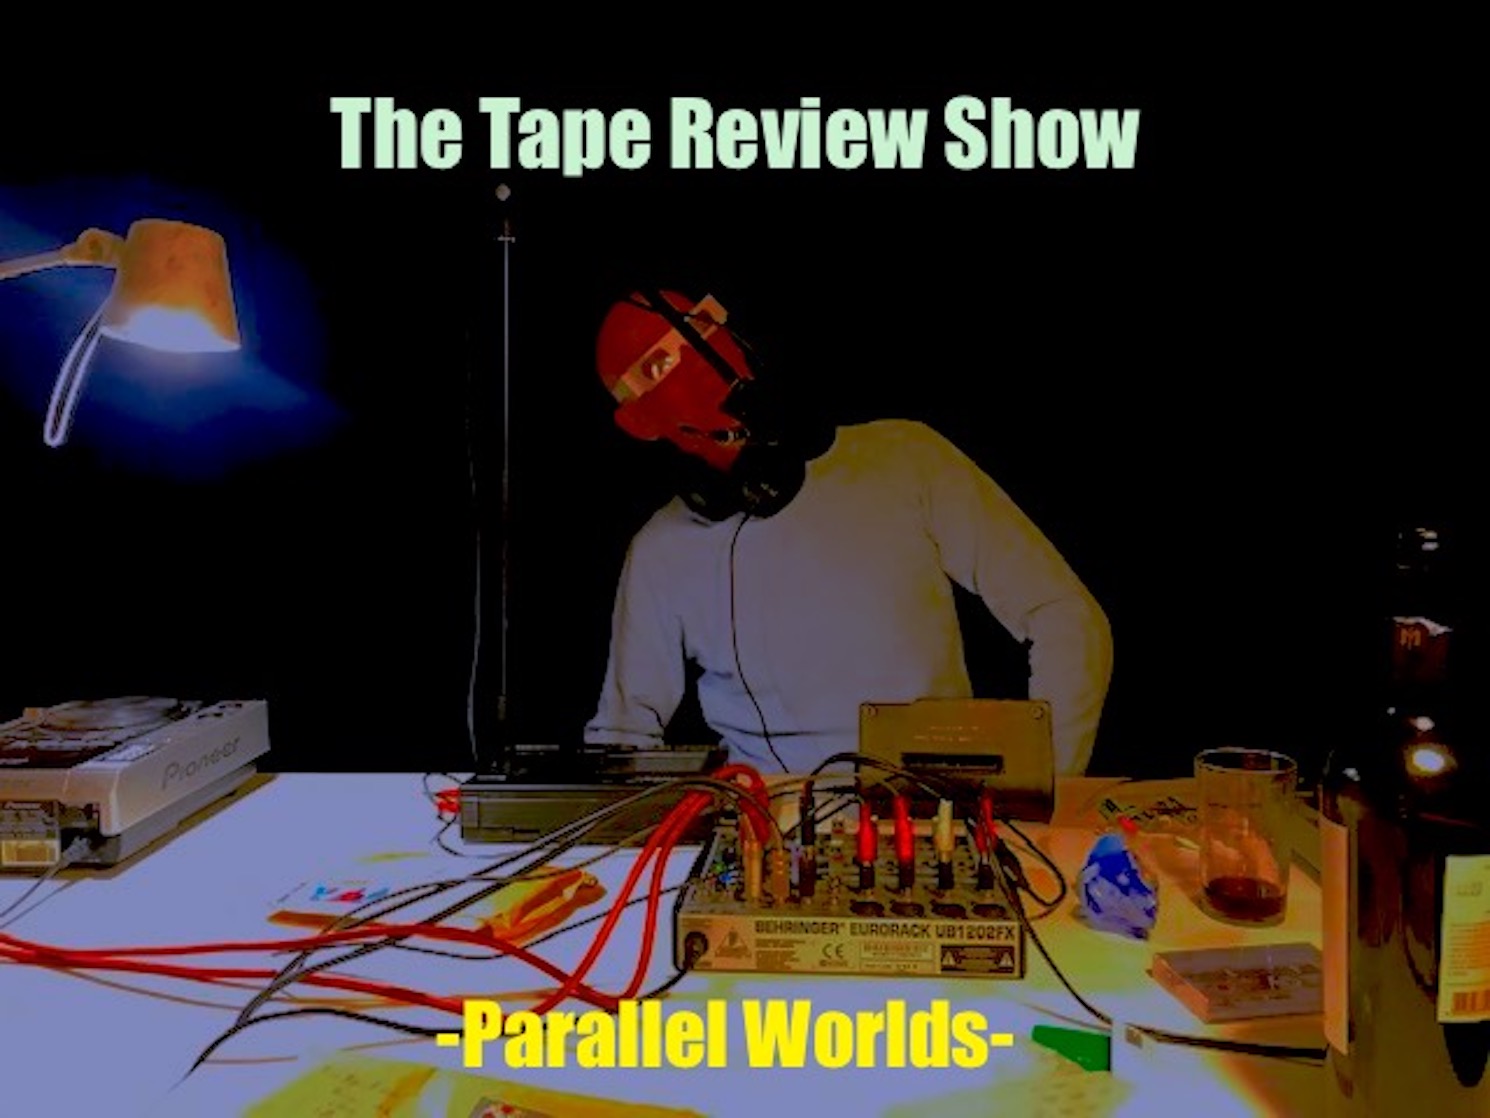 The Tape Review Show – parallel worlds